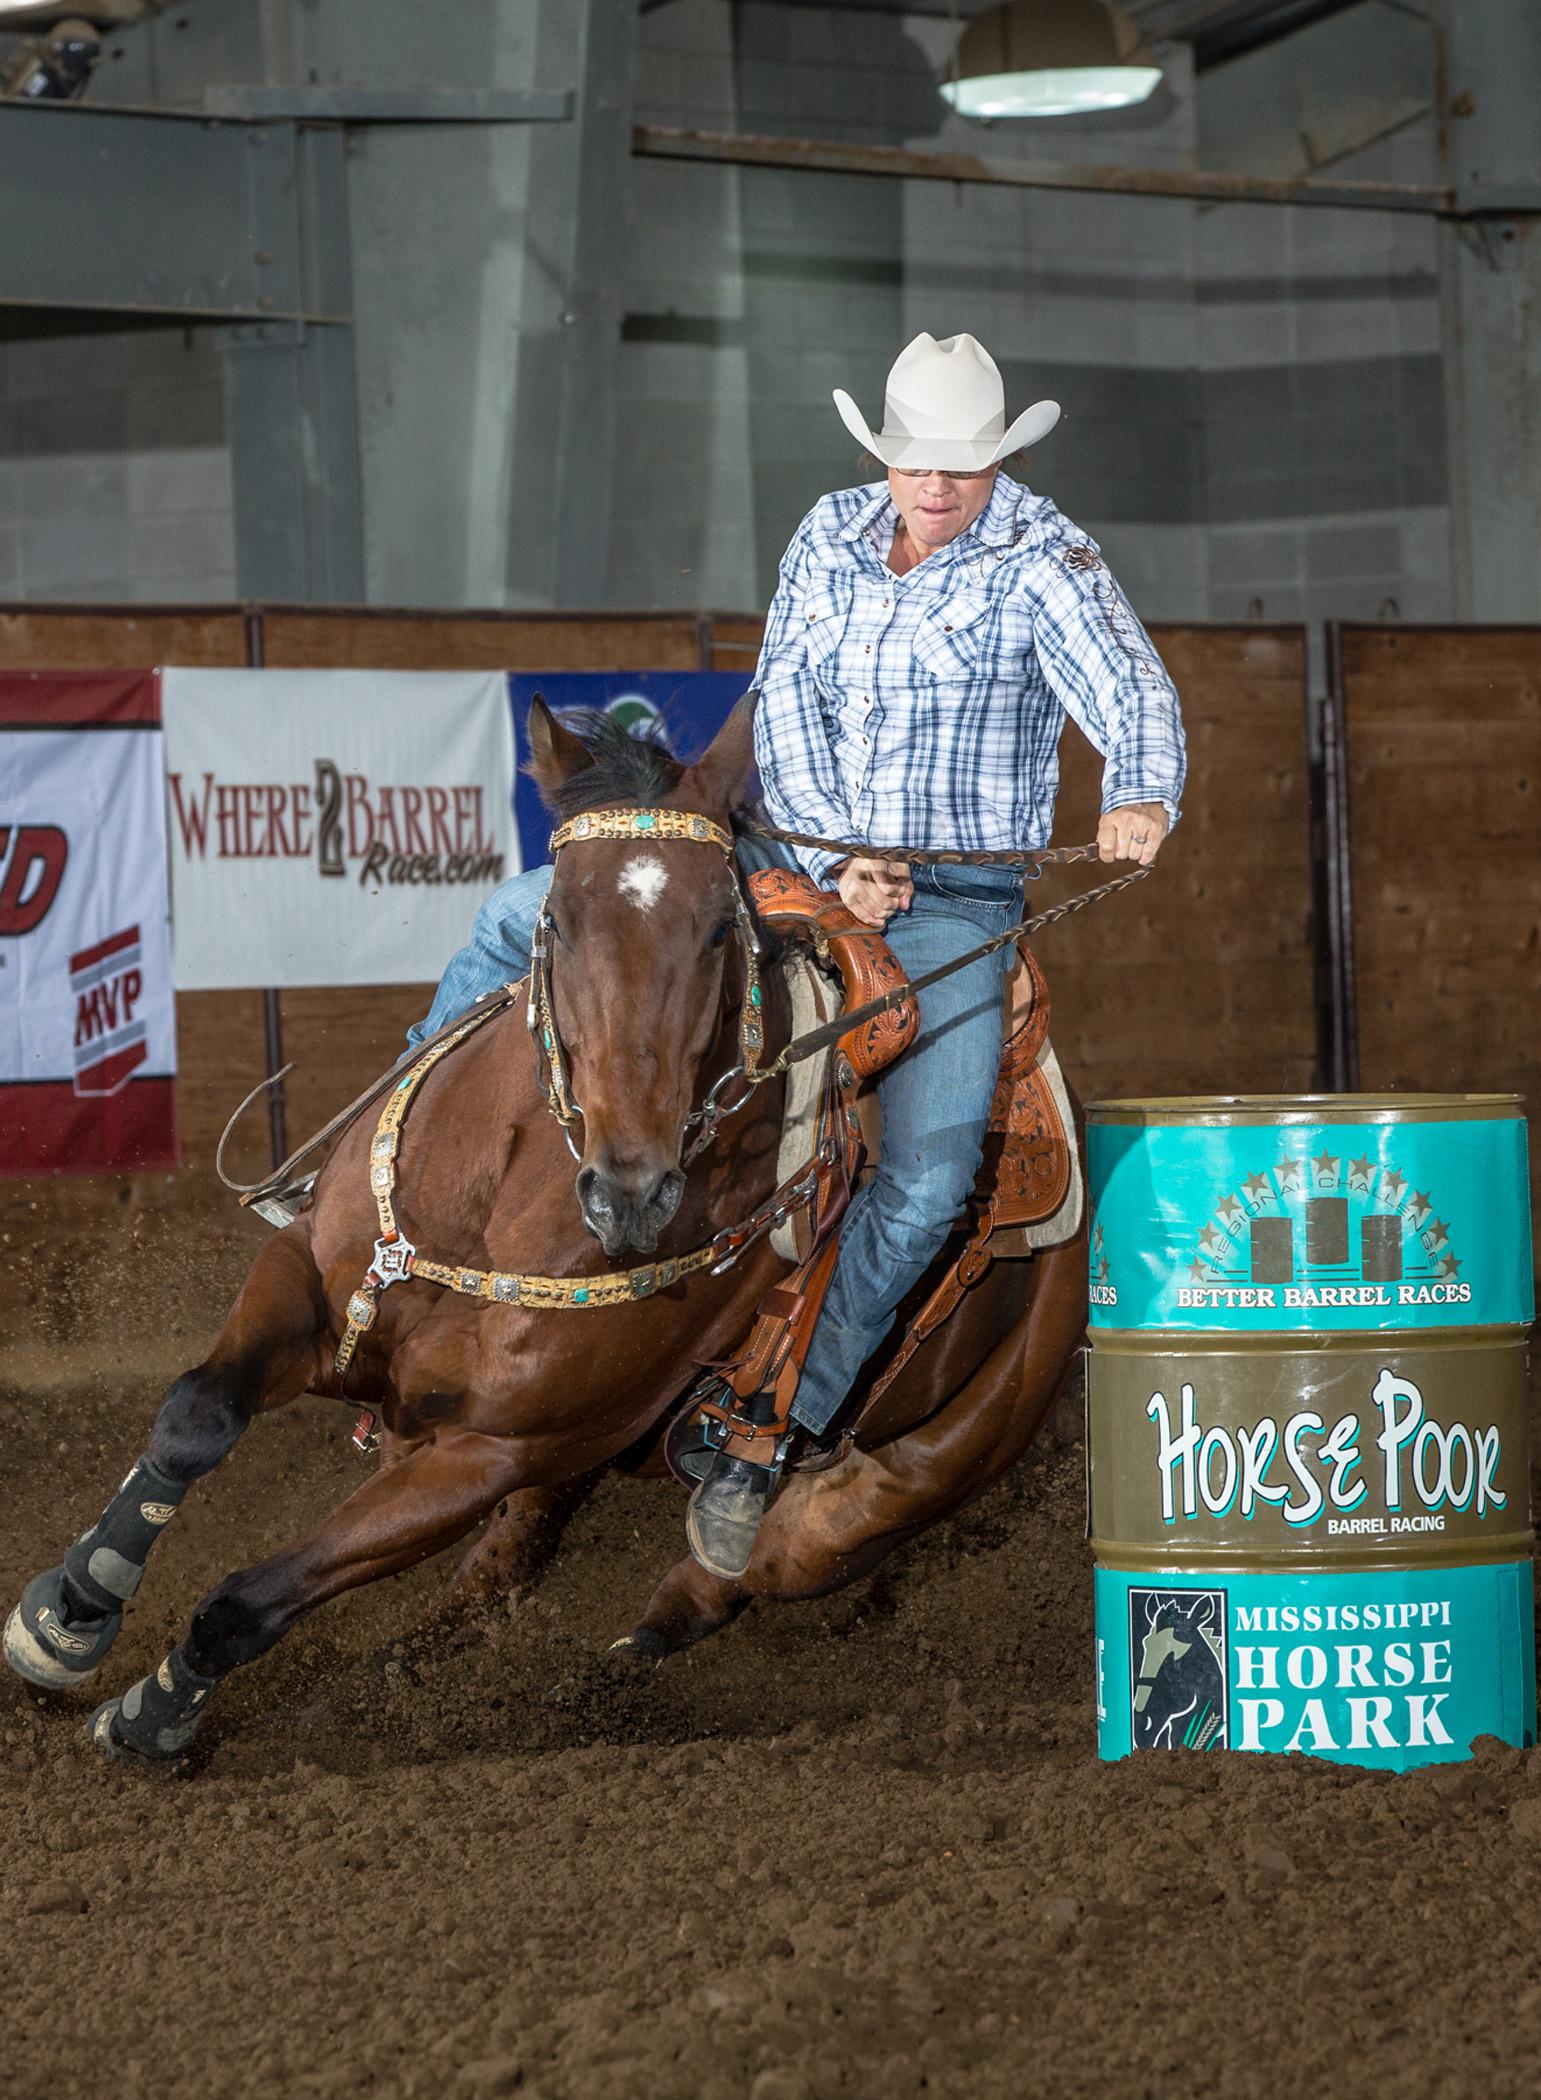 This barrel racer was one of 1,651 entries from across the country at the Mississippi Horse Park during 2013 Horse Poor event, which was held in conjunction with the Better Barrel Racing Association Eastern Regional Tour Finale. The 2014 competition will be one of 10 qualifying events for The American, the world's richest one-day rodeo final, and will be nationally televised on RFD-TV on Oct. 17. (Submitted Photo)